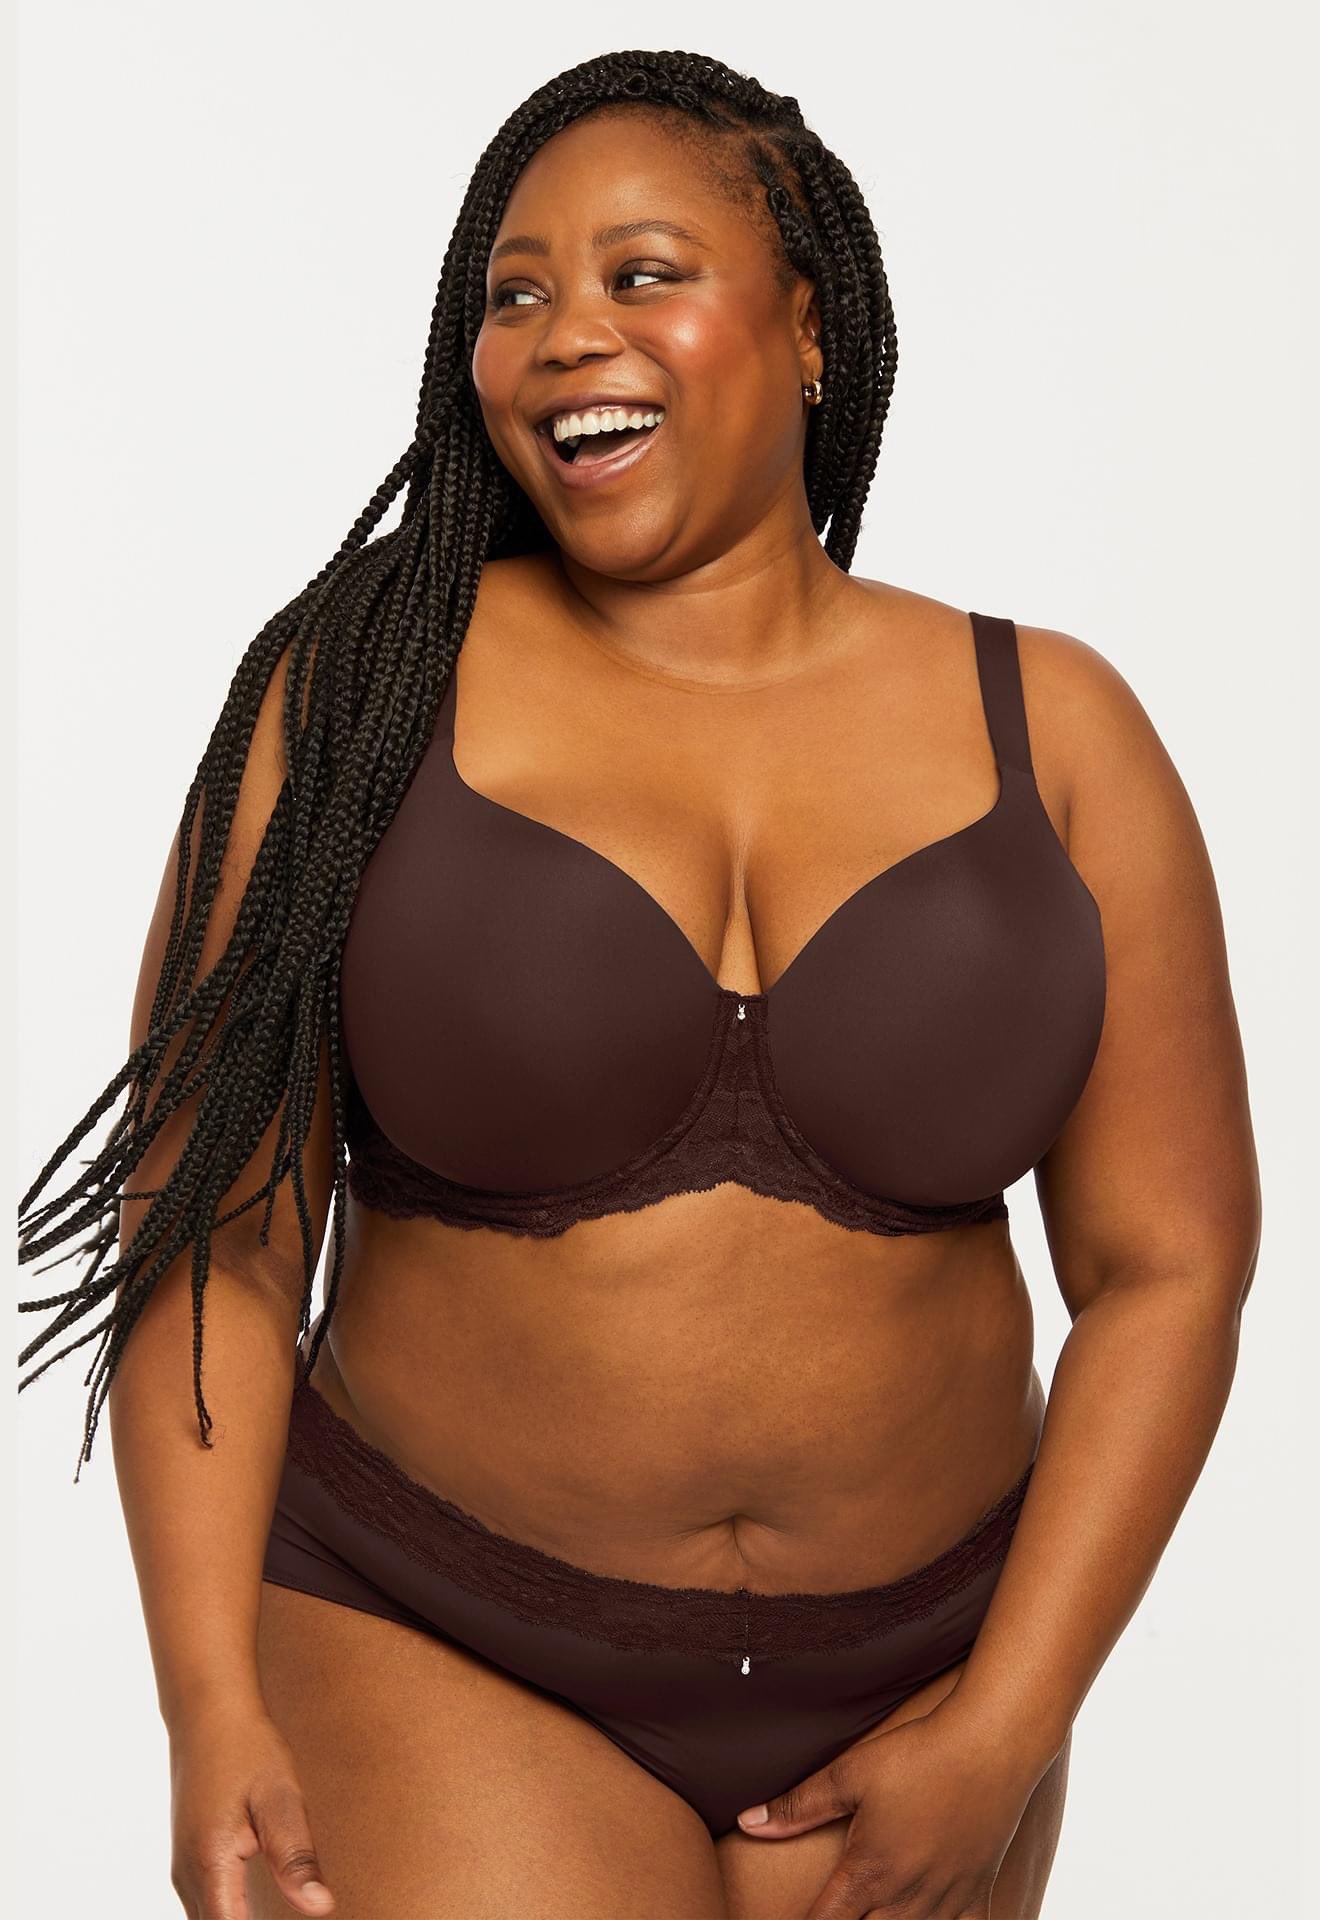 a la mode intimates on X: We offer body-positive styles & fit for all  sizes & shapes, carrying literally 100s of band/cup combinations you won't  find in dept store. Our professionally certified